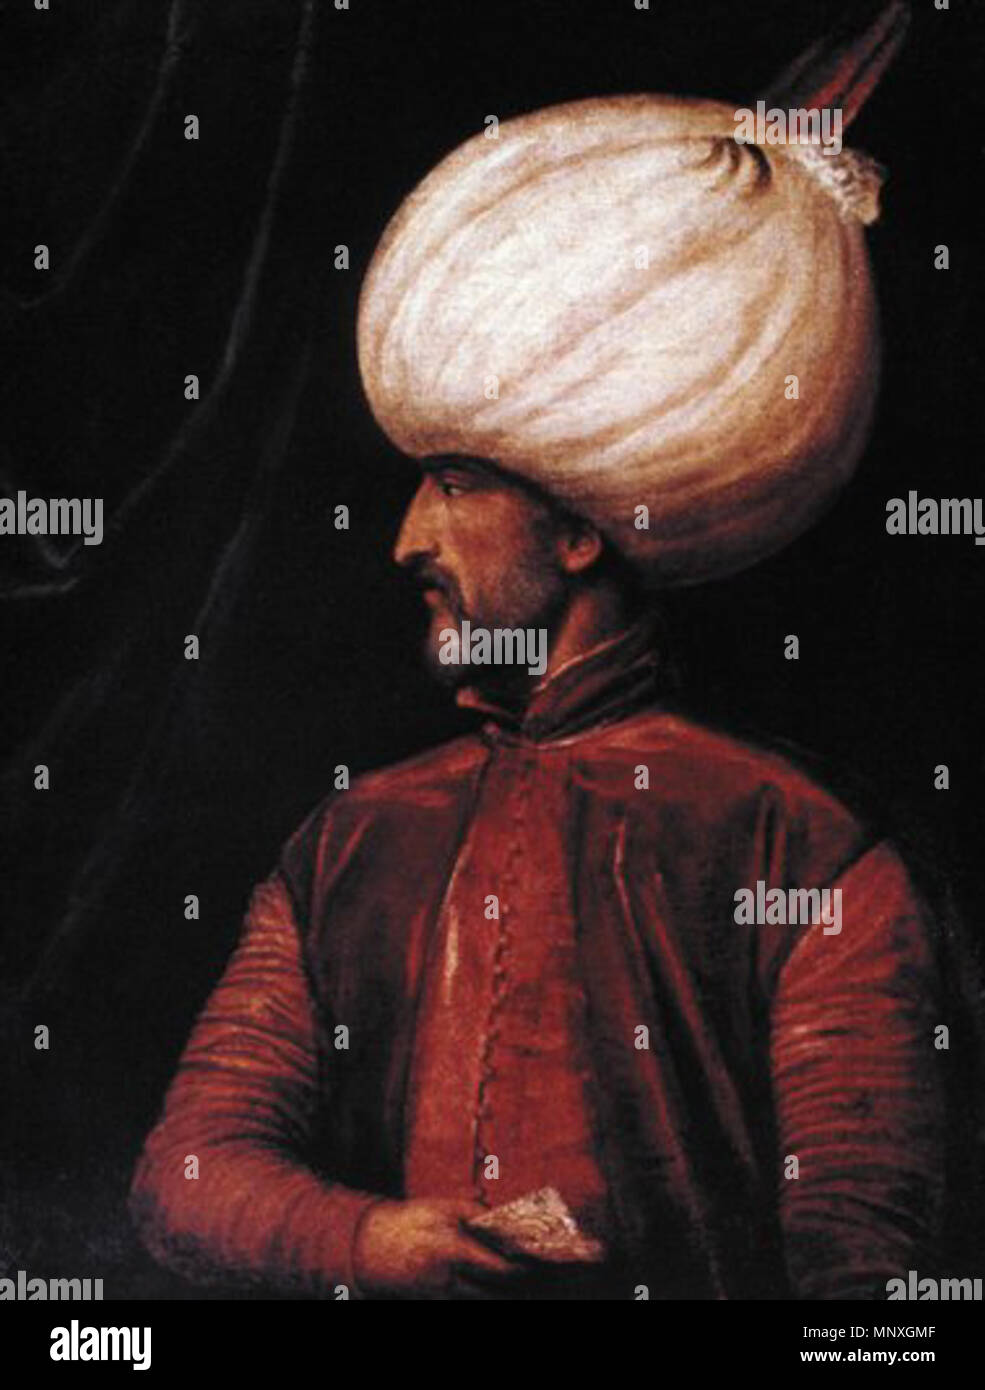 . English: Suleiman the Magnificent, sultan of the Ottoman Empire at the height of its power, from 1520 to 1566; sixteenth-century painting by a member of the Venetian school . 20 July 2011. en:User:Erkistreet 1150 SuleimanIofOttomanEmpire Stock Photo